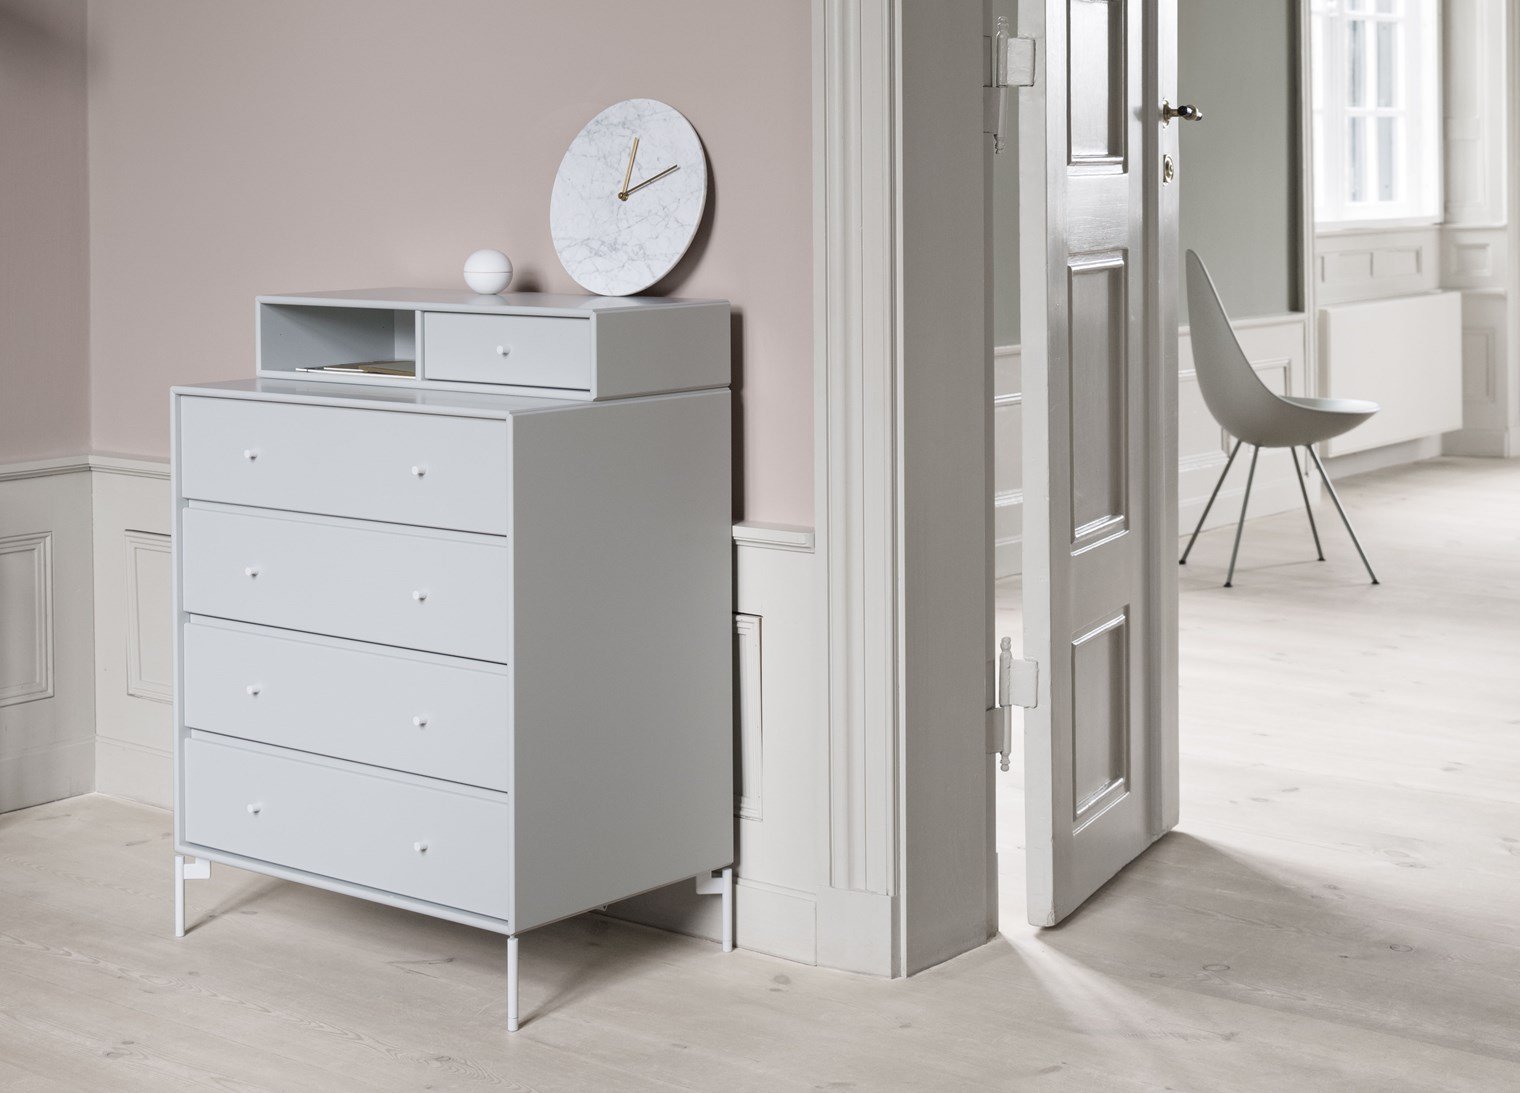 Montana Keep Bre of Drawers med 3 cm piedestal, dimma